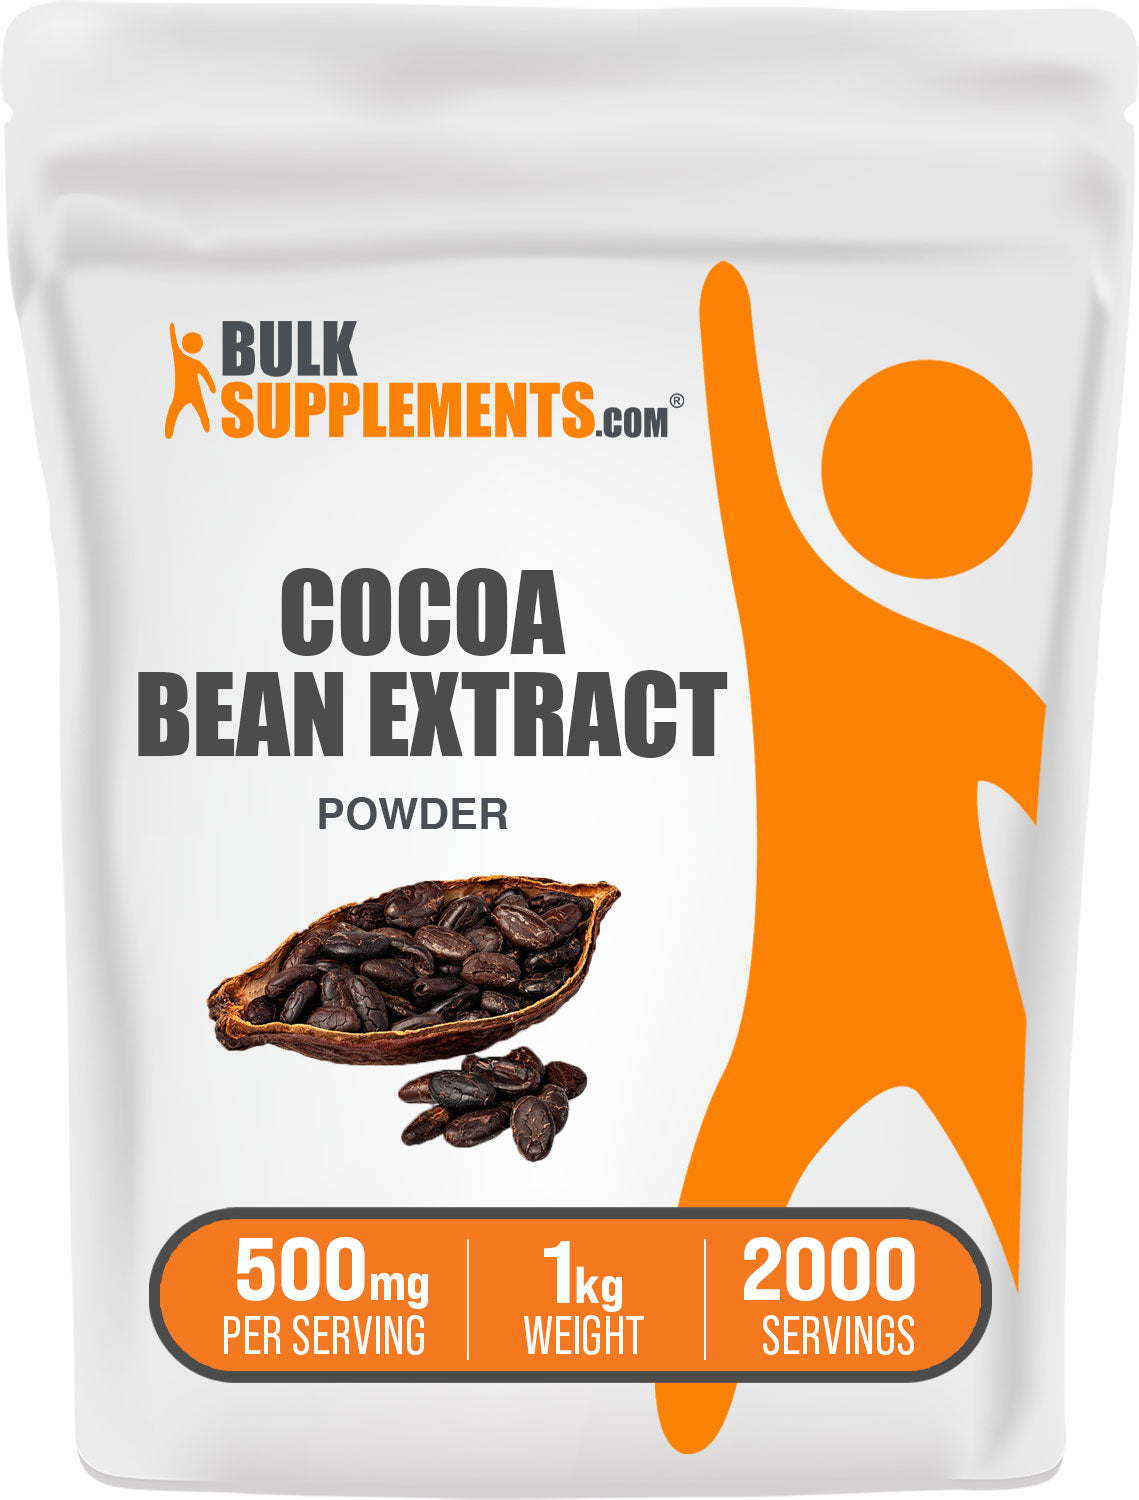 1kg cocoa bean extract